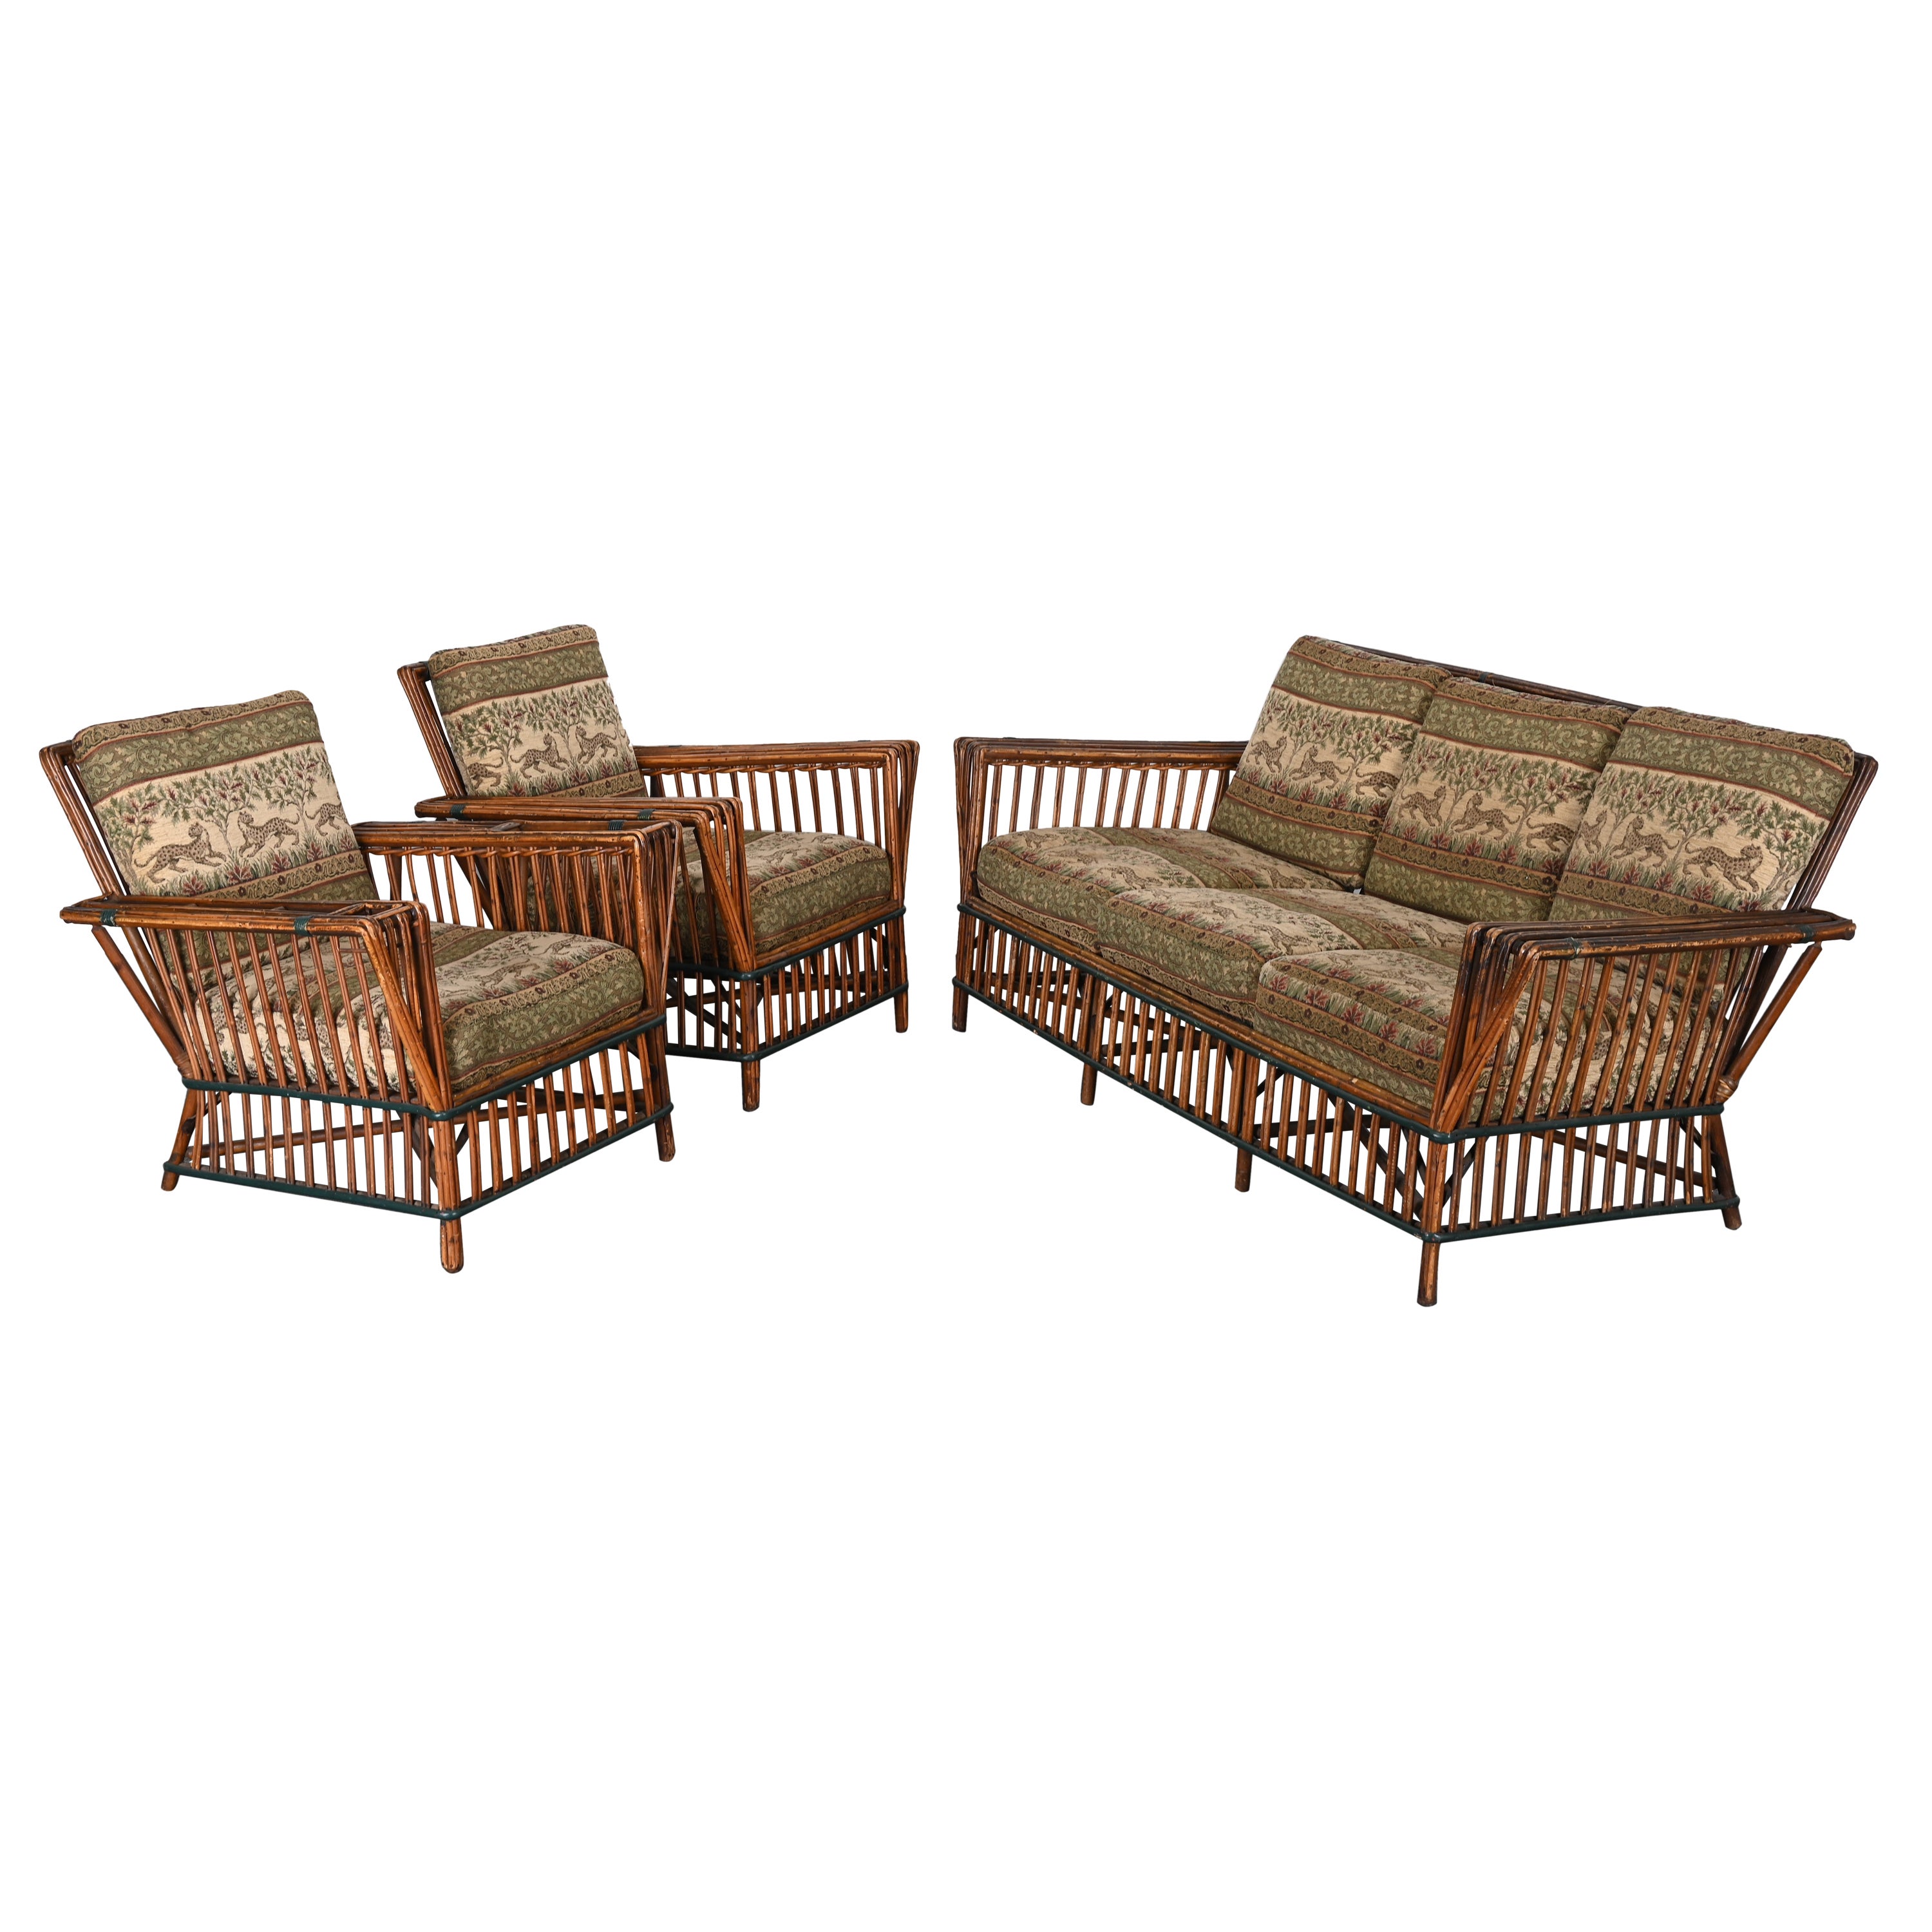 Art Deco Split Ypsilanti Stick Reed Wicker or Sofa with Pair Arm Chairs c. 1930s For Sale